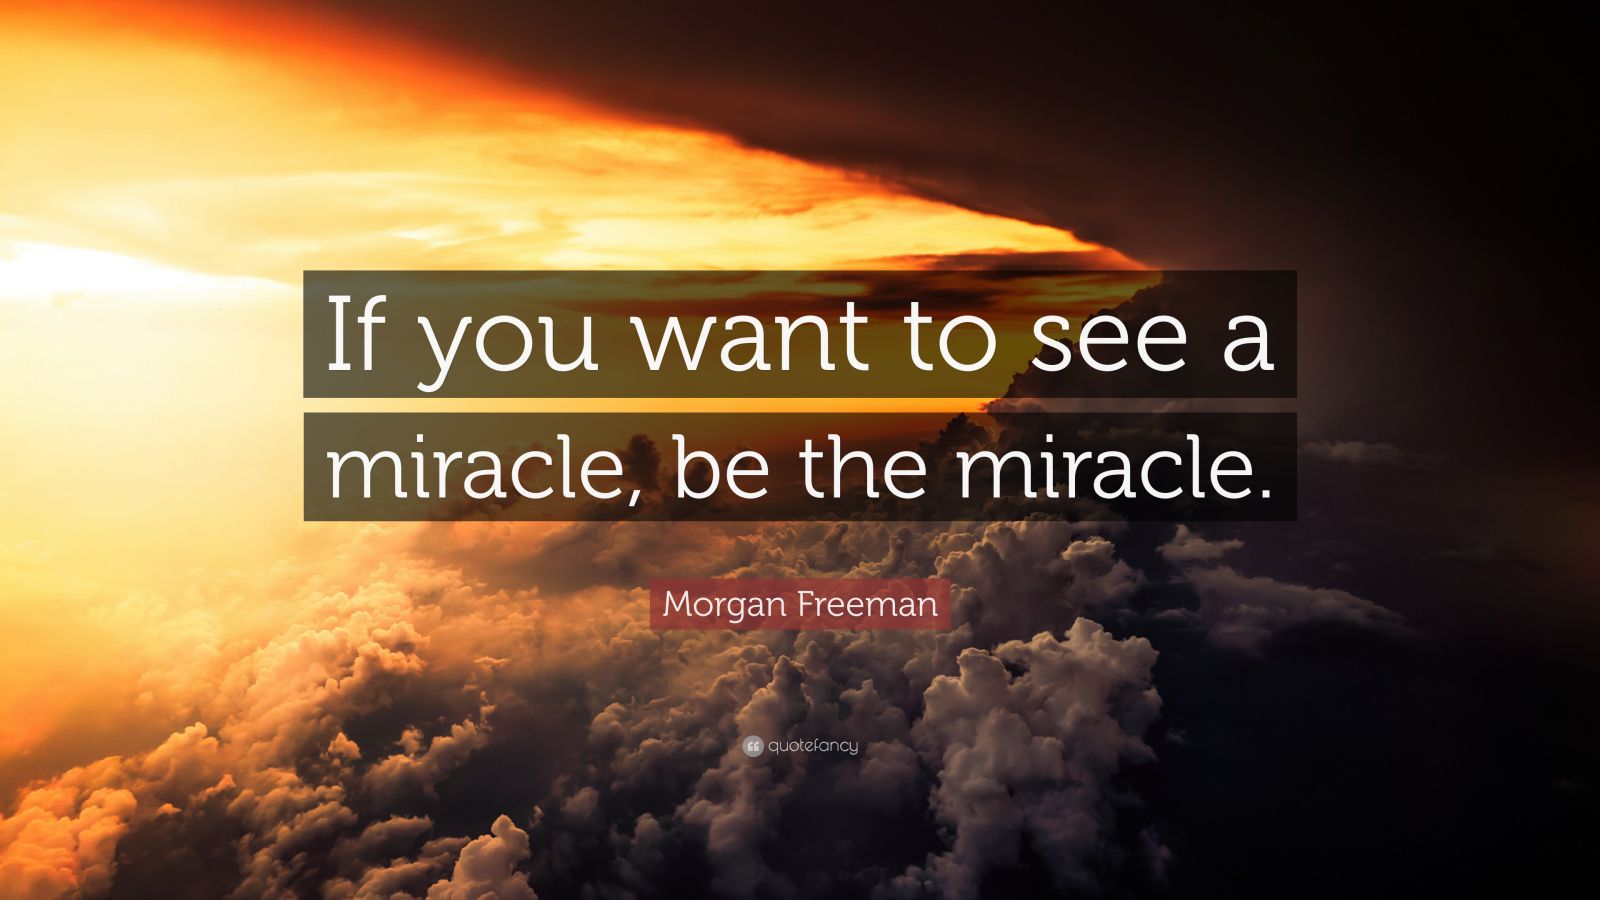 Morgan Freeman Quote “if You Want To See A Miracle Be The Miracle” 9 Wallpapers Quotefancy 5101